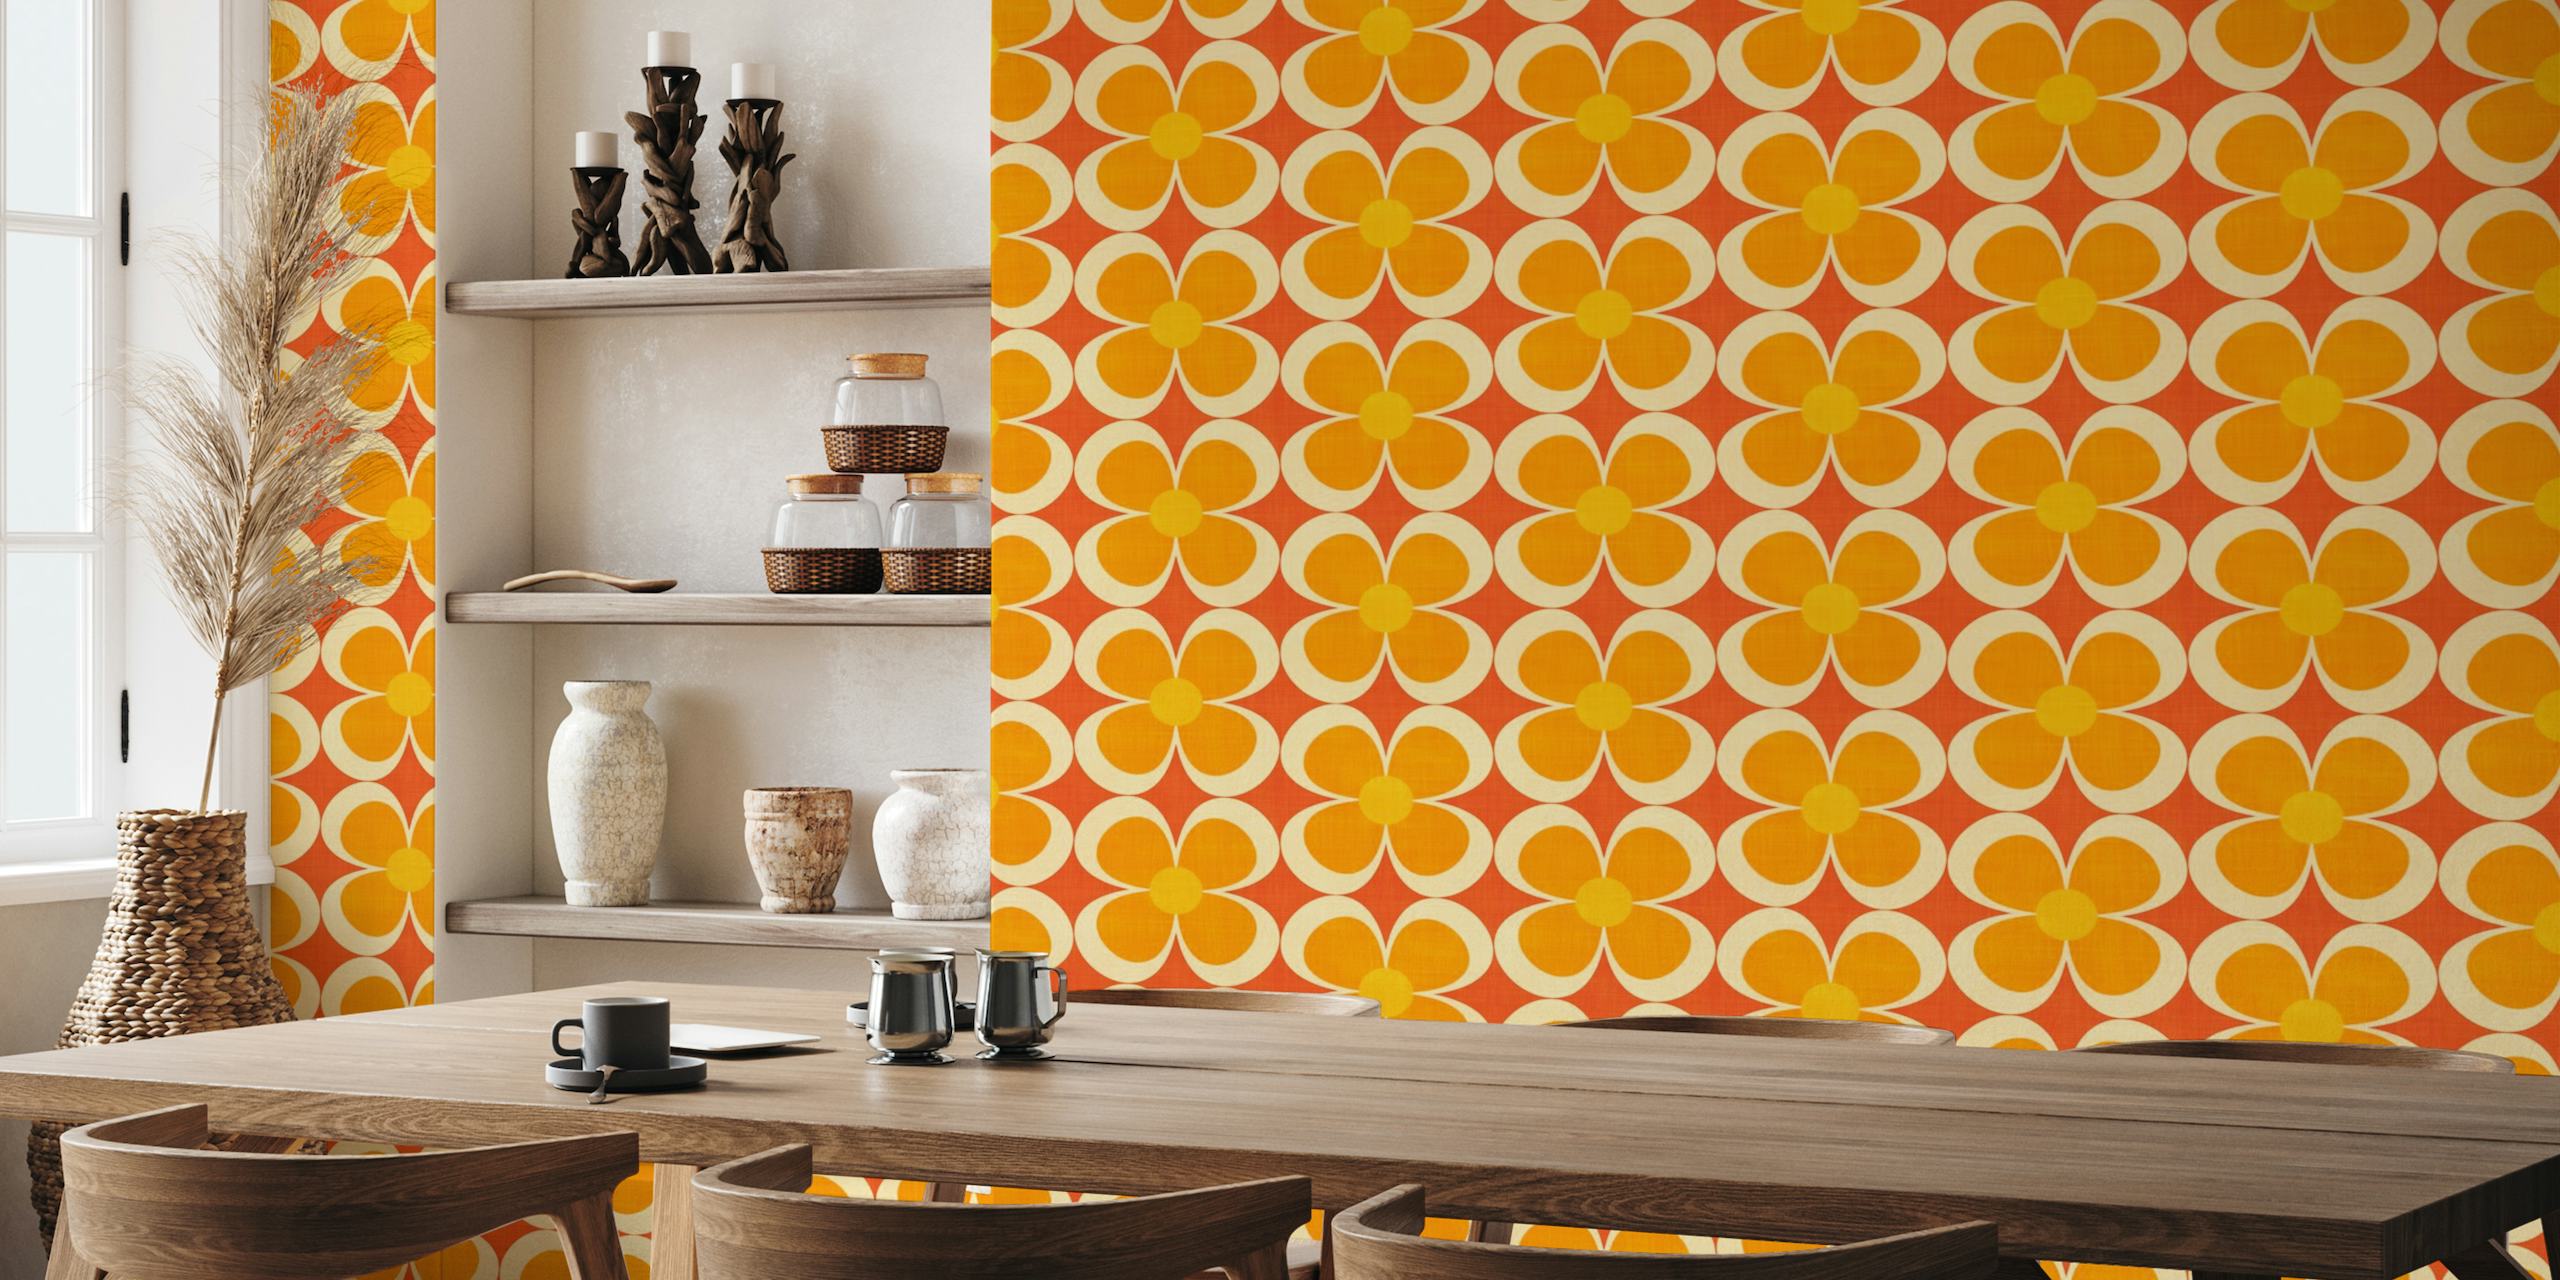 Groovy Geometric Floral Orange Red Small ταπετσαρία